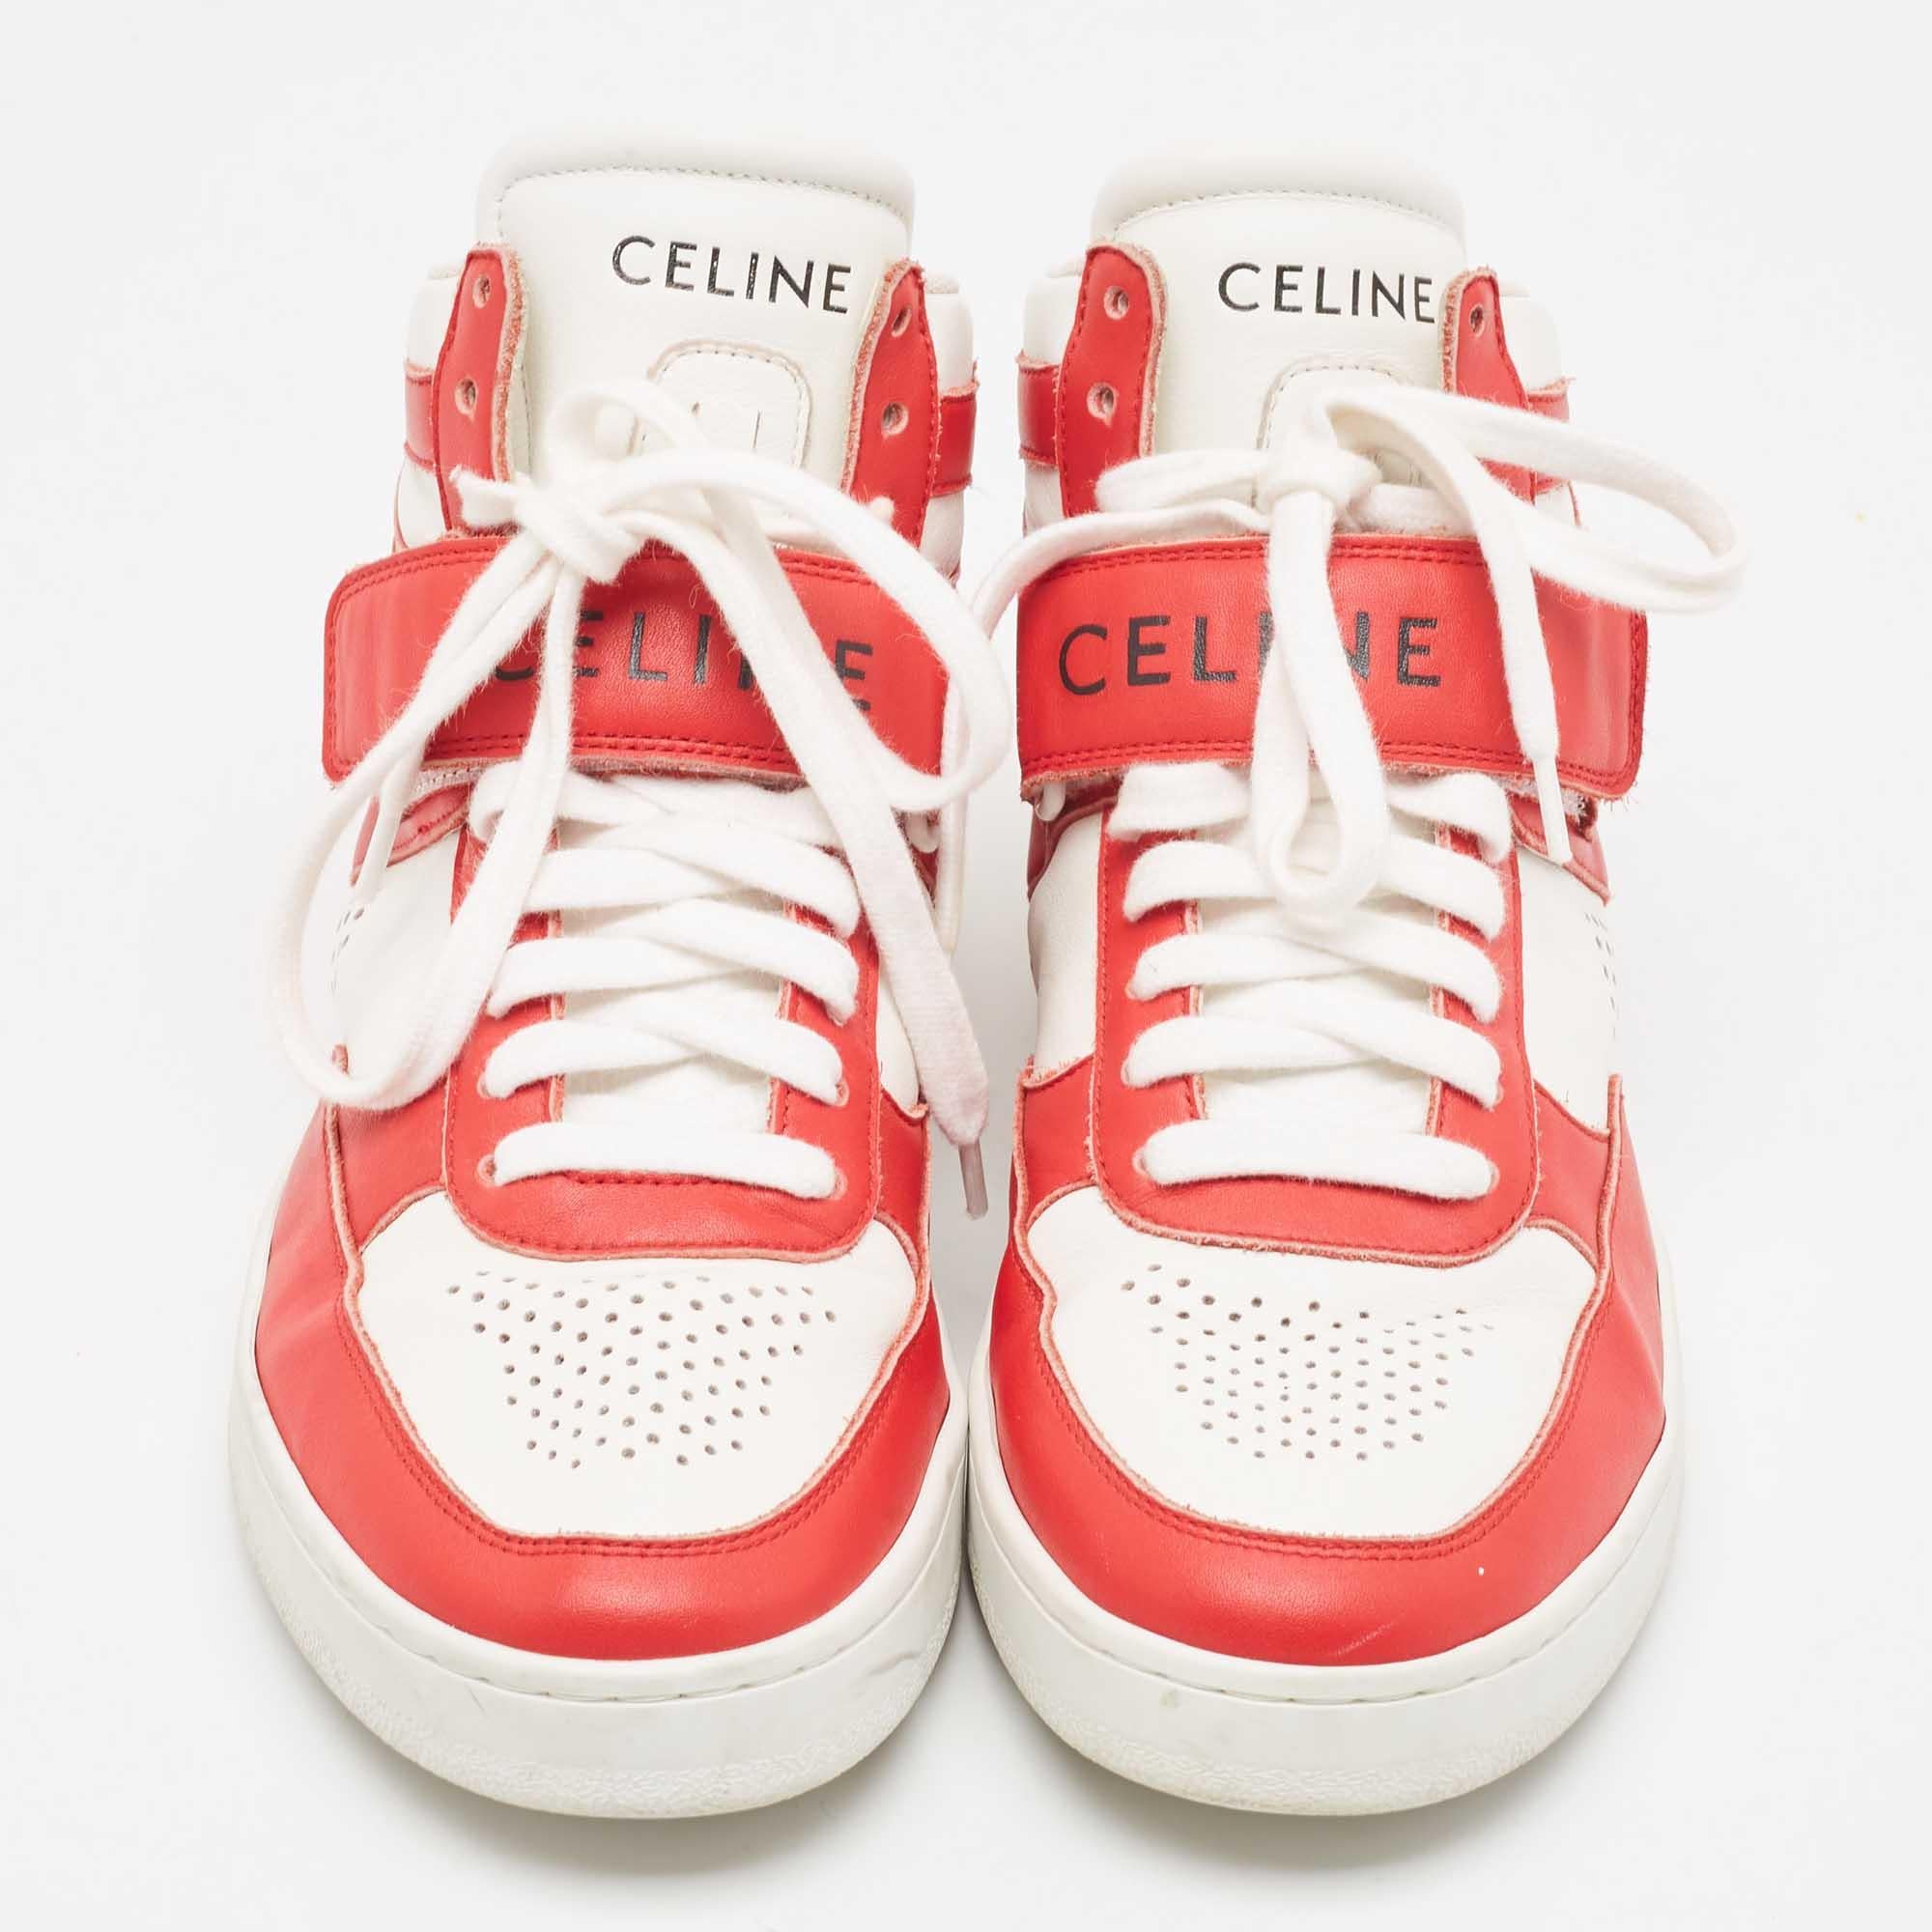 Elevate your footwear game with these Celine red/white sneakers. Combining high-end aesthetics and unmatched comfort, these sneakers are a symbol of modern luxury and impeccable taste.

